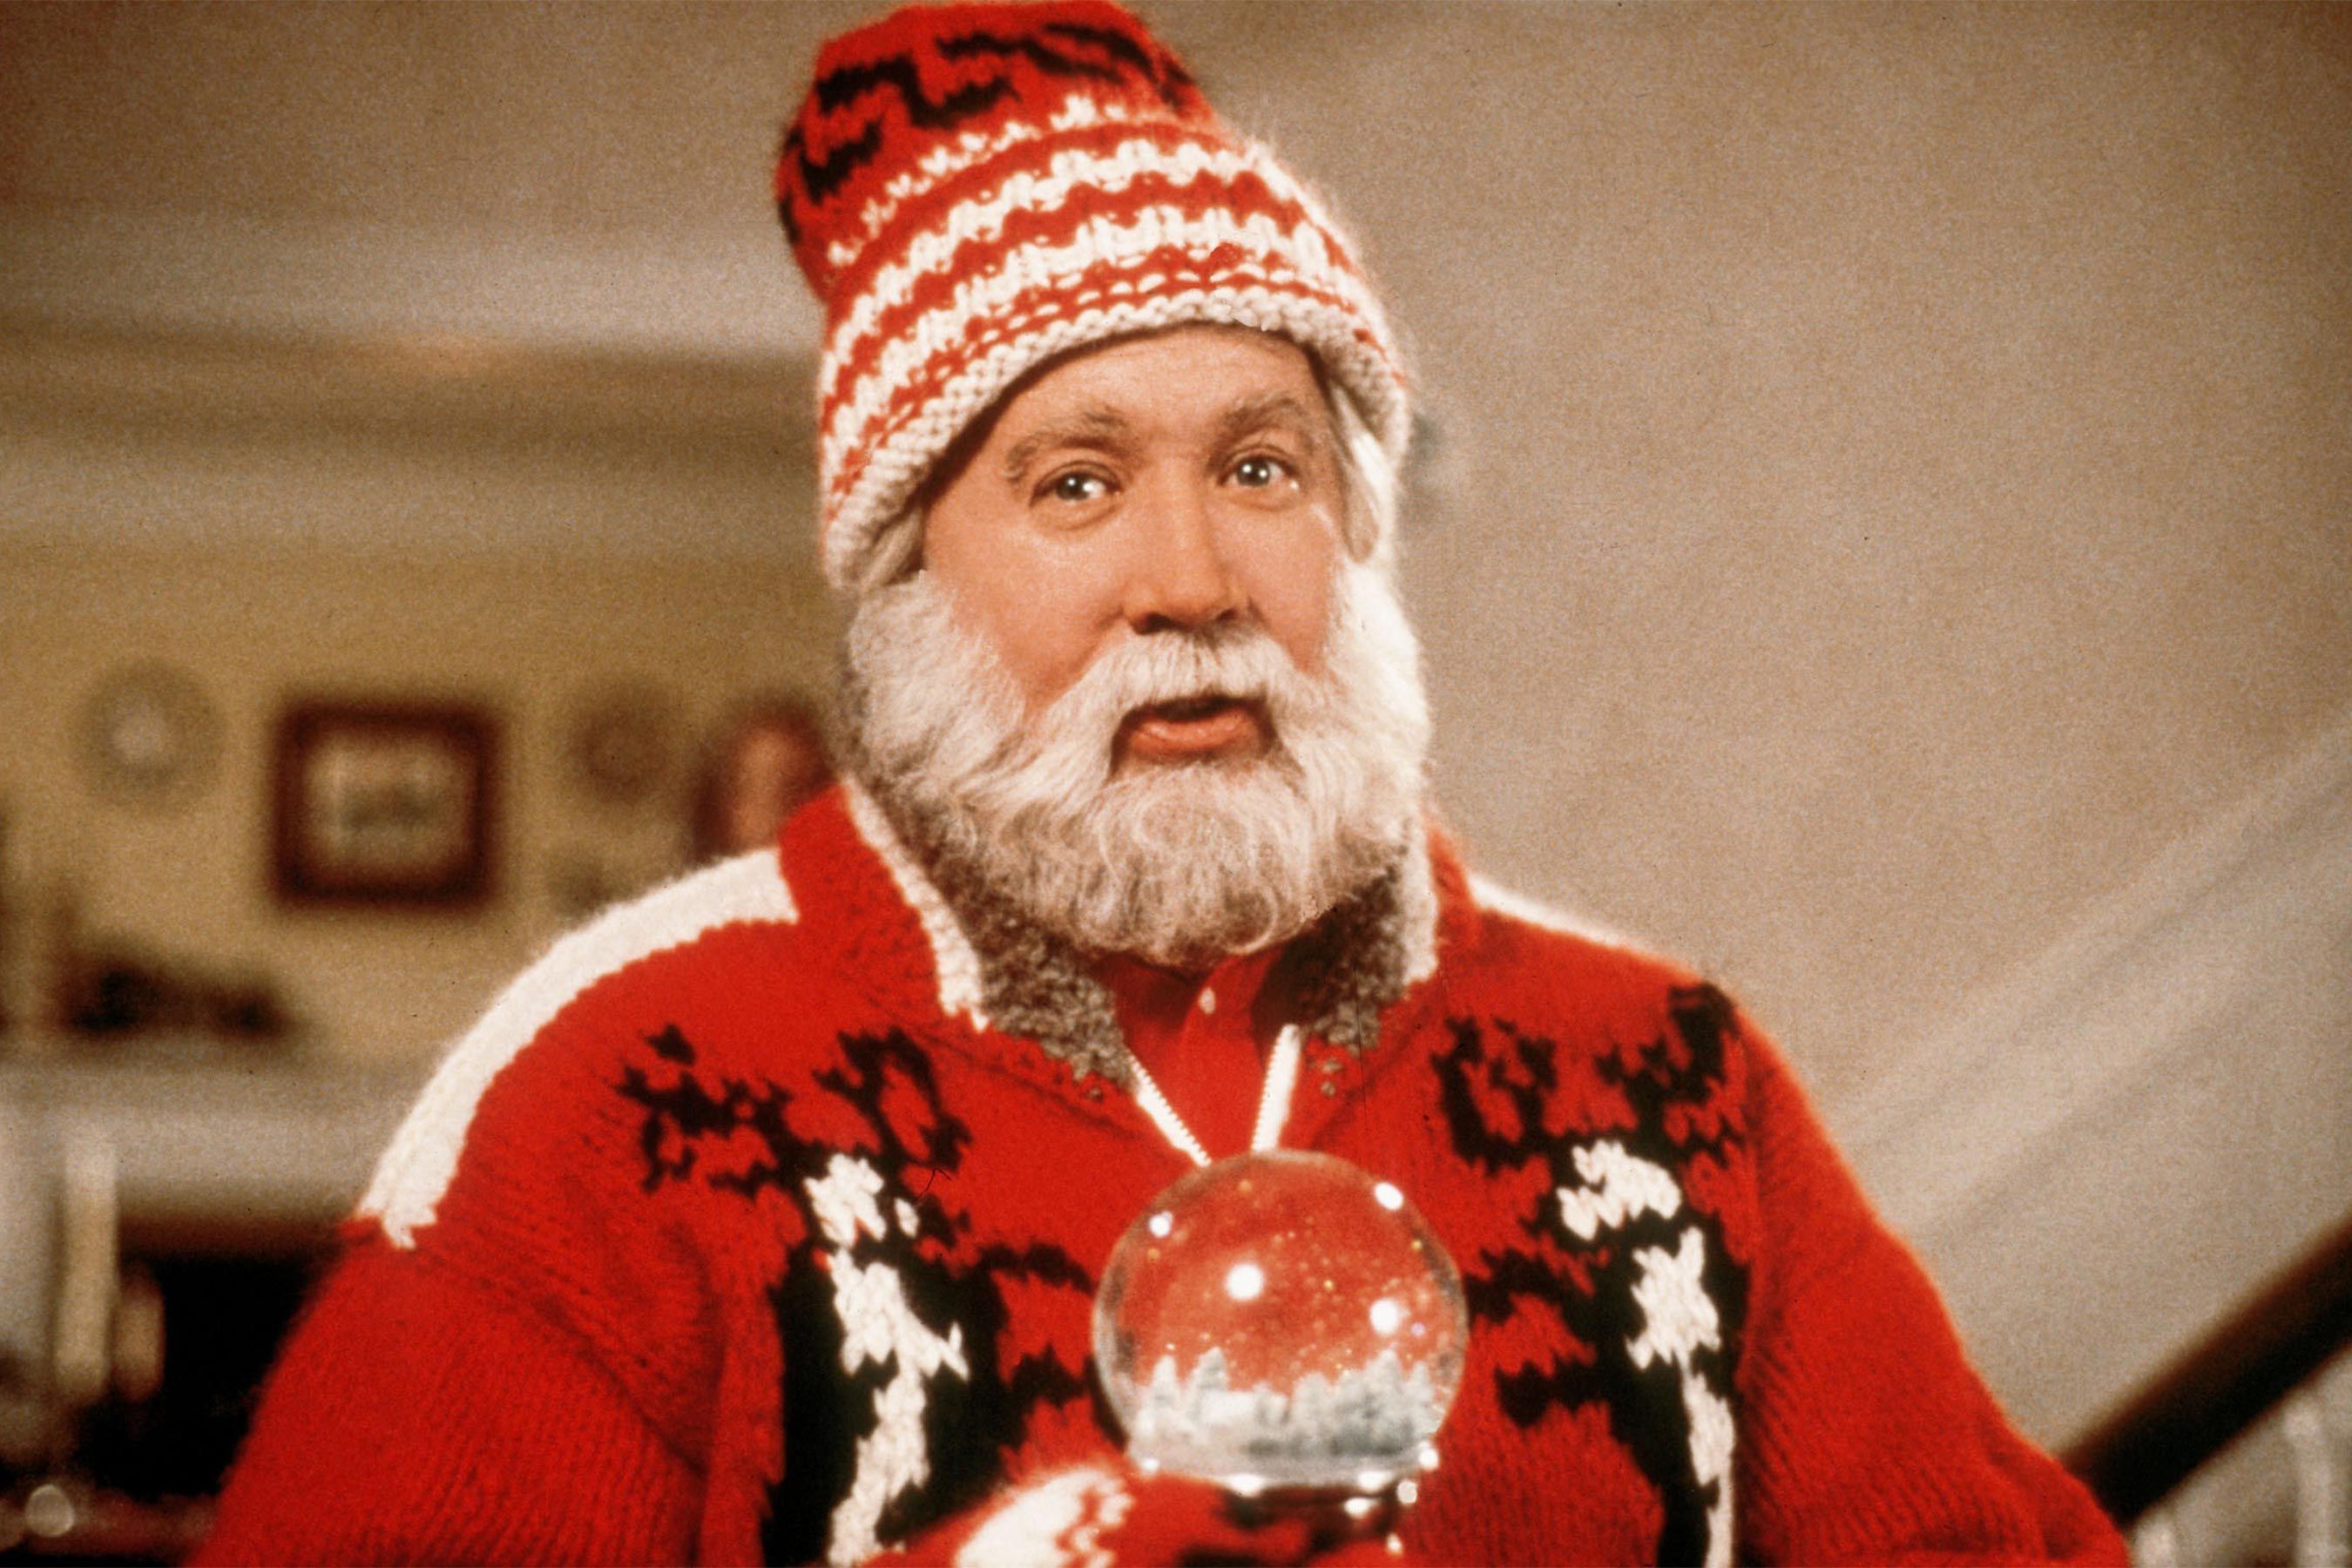 The Santa Clause | These Christmas Movies Will Get You Into The Holiday Spirit | Popcorn Banter